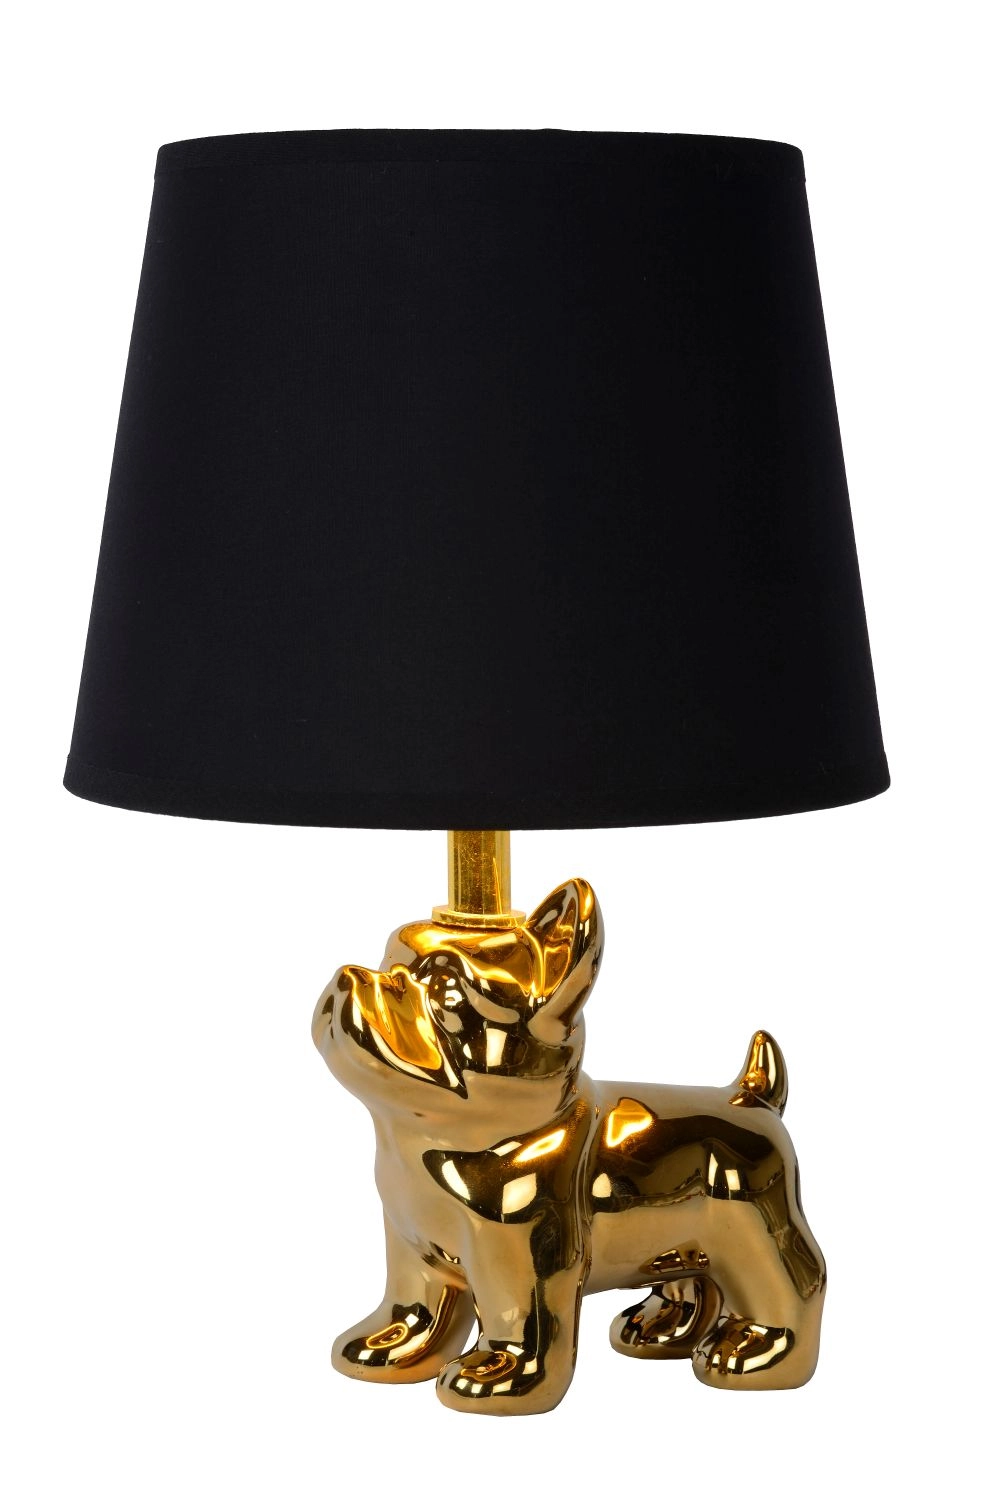 LU 13533/81/10 Lucide EXTRAVAGANZA SIR WINSTON - Table lamp - 1xE14 - Gold